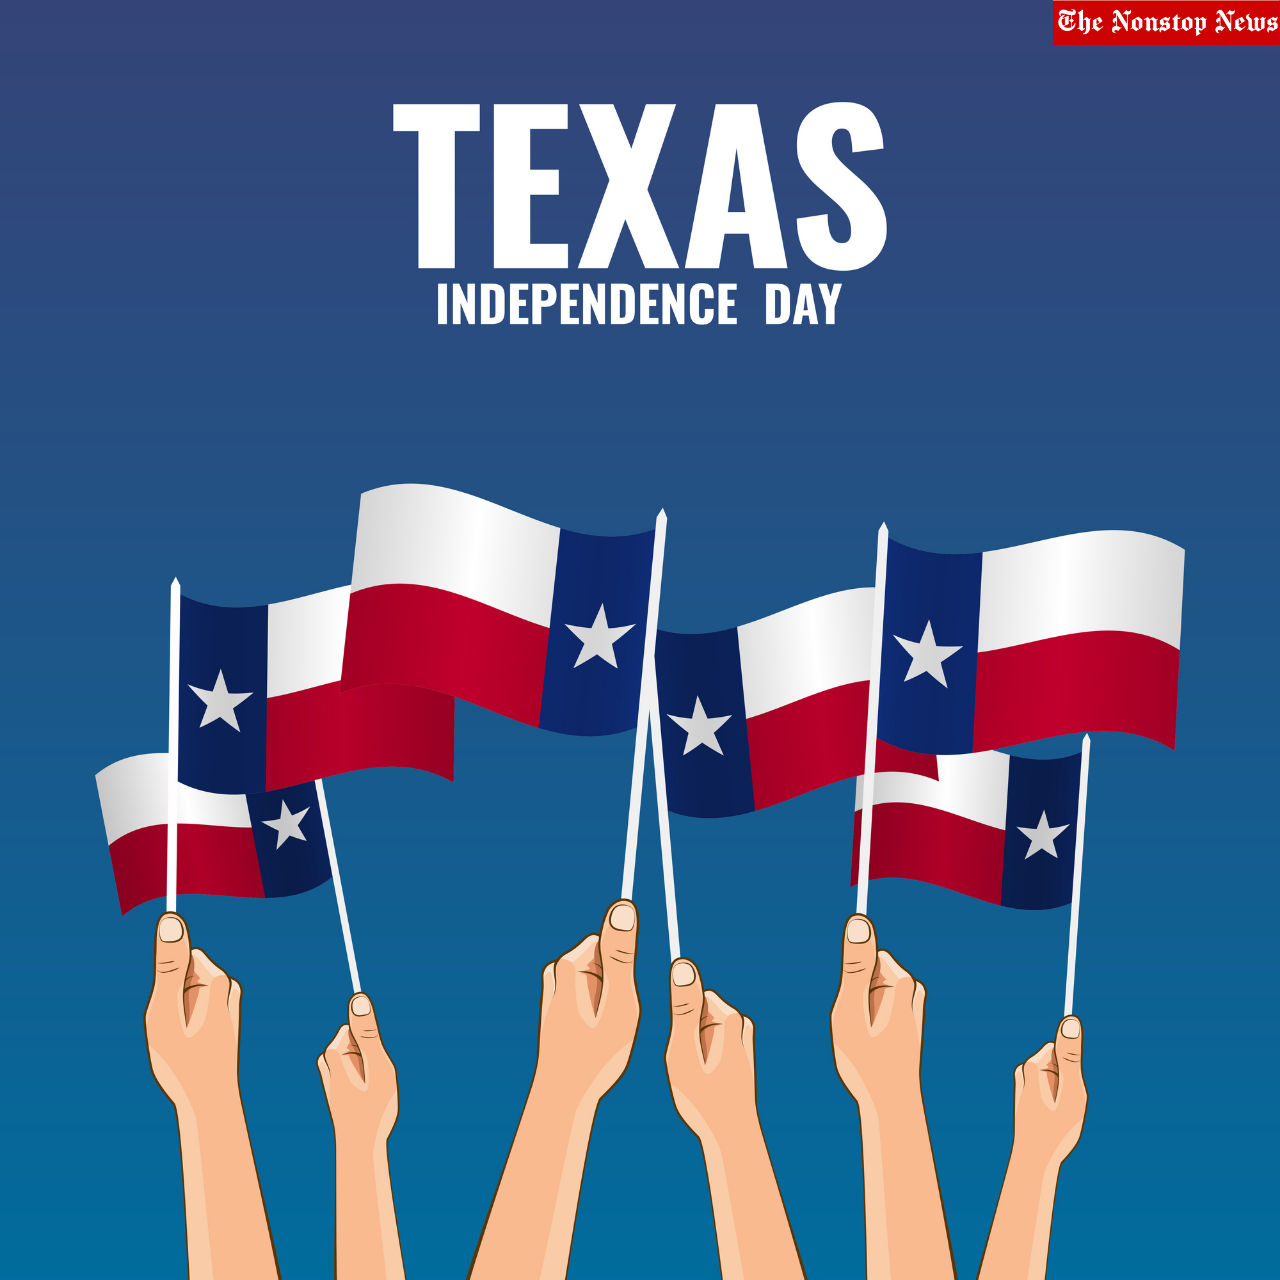 Texas Independence Day 2022 Quotes, Wishes, Greetings, HD Images, Sayings, Messages, and Instagram Captions to commemorate the adoption of the Texas Declaration of Independence